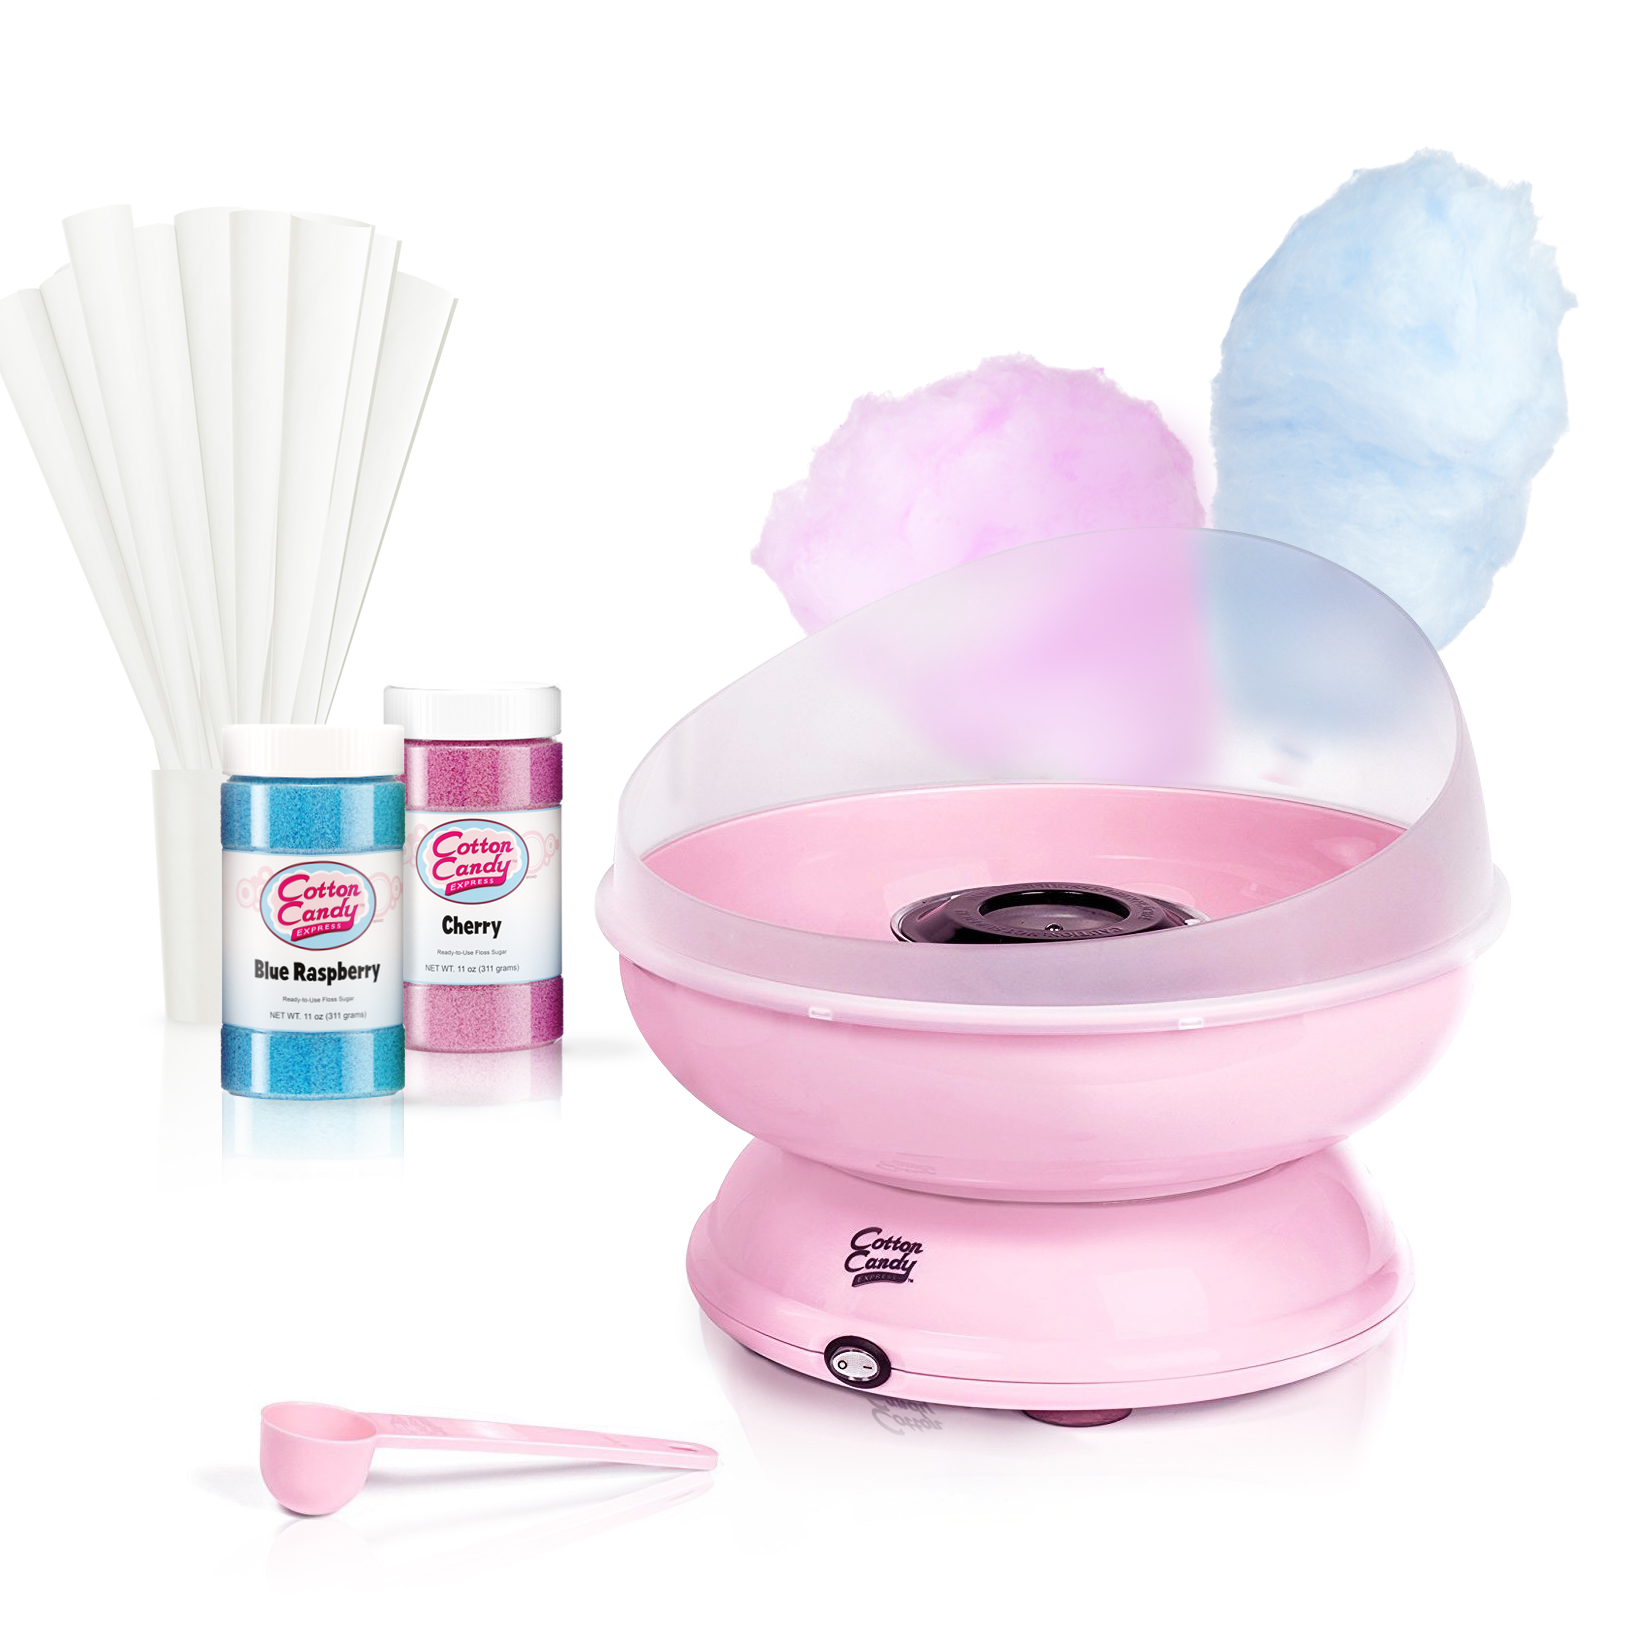 Cotton Candy Express Cotton Candy Machine with 2 Flavors and 50 Paper Cones - image 1 of 7